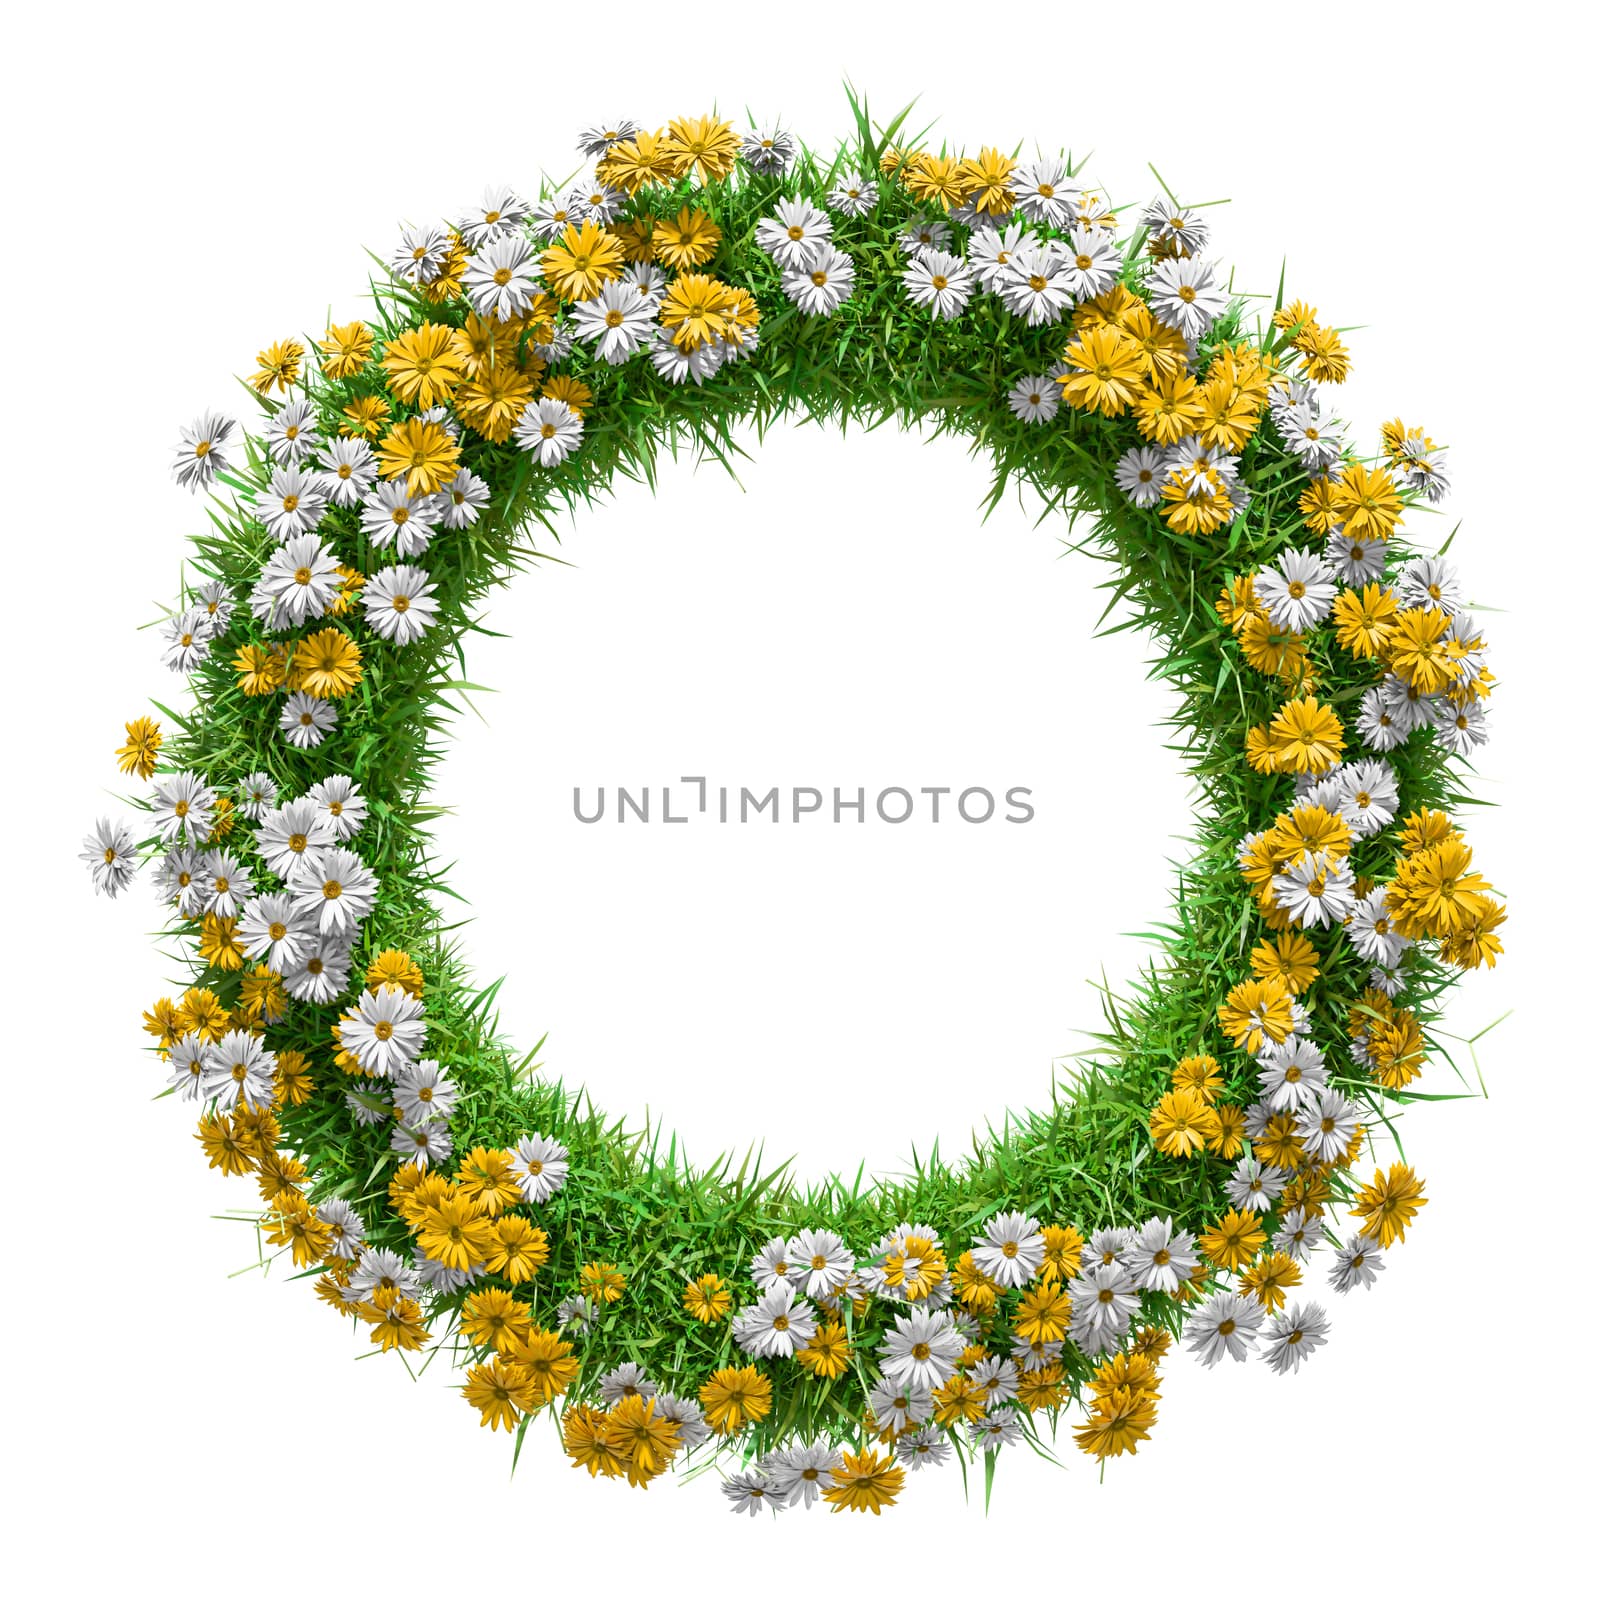 Round natural frame with grass and flowers. 3d illustration